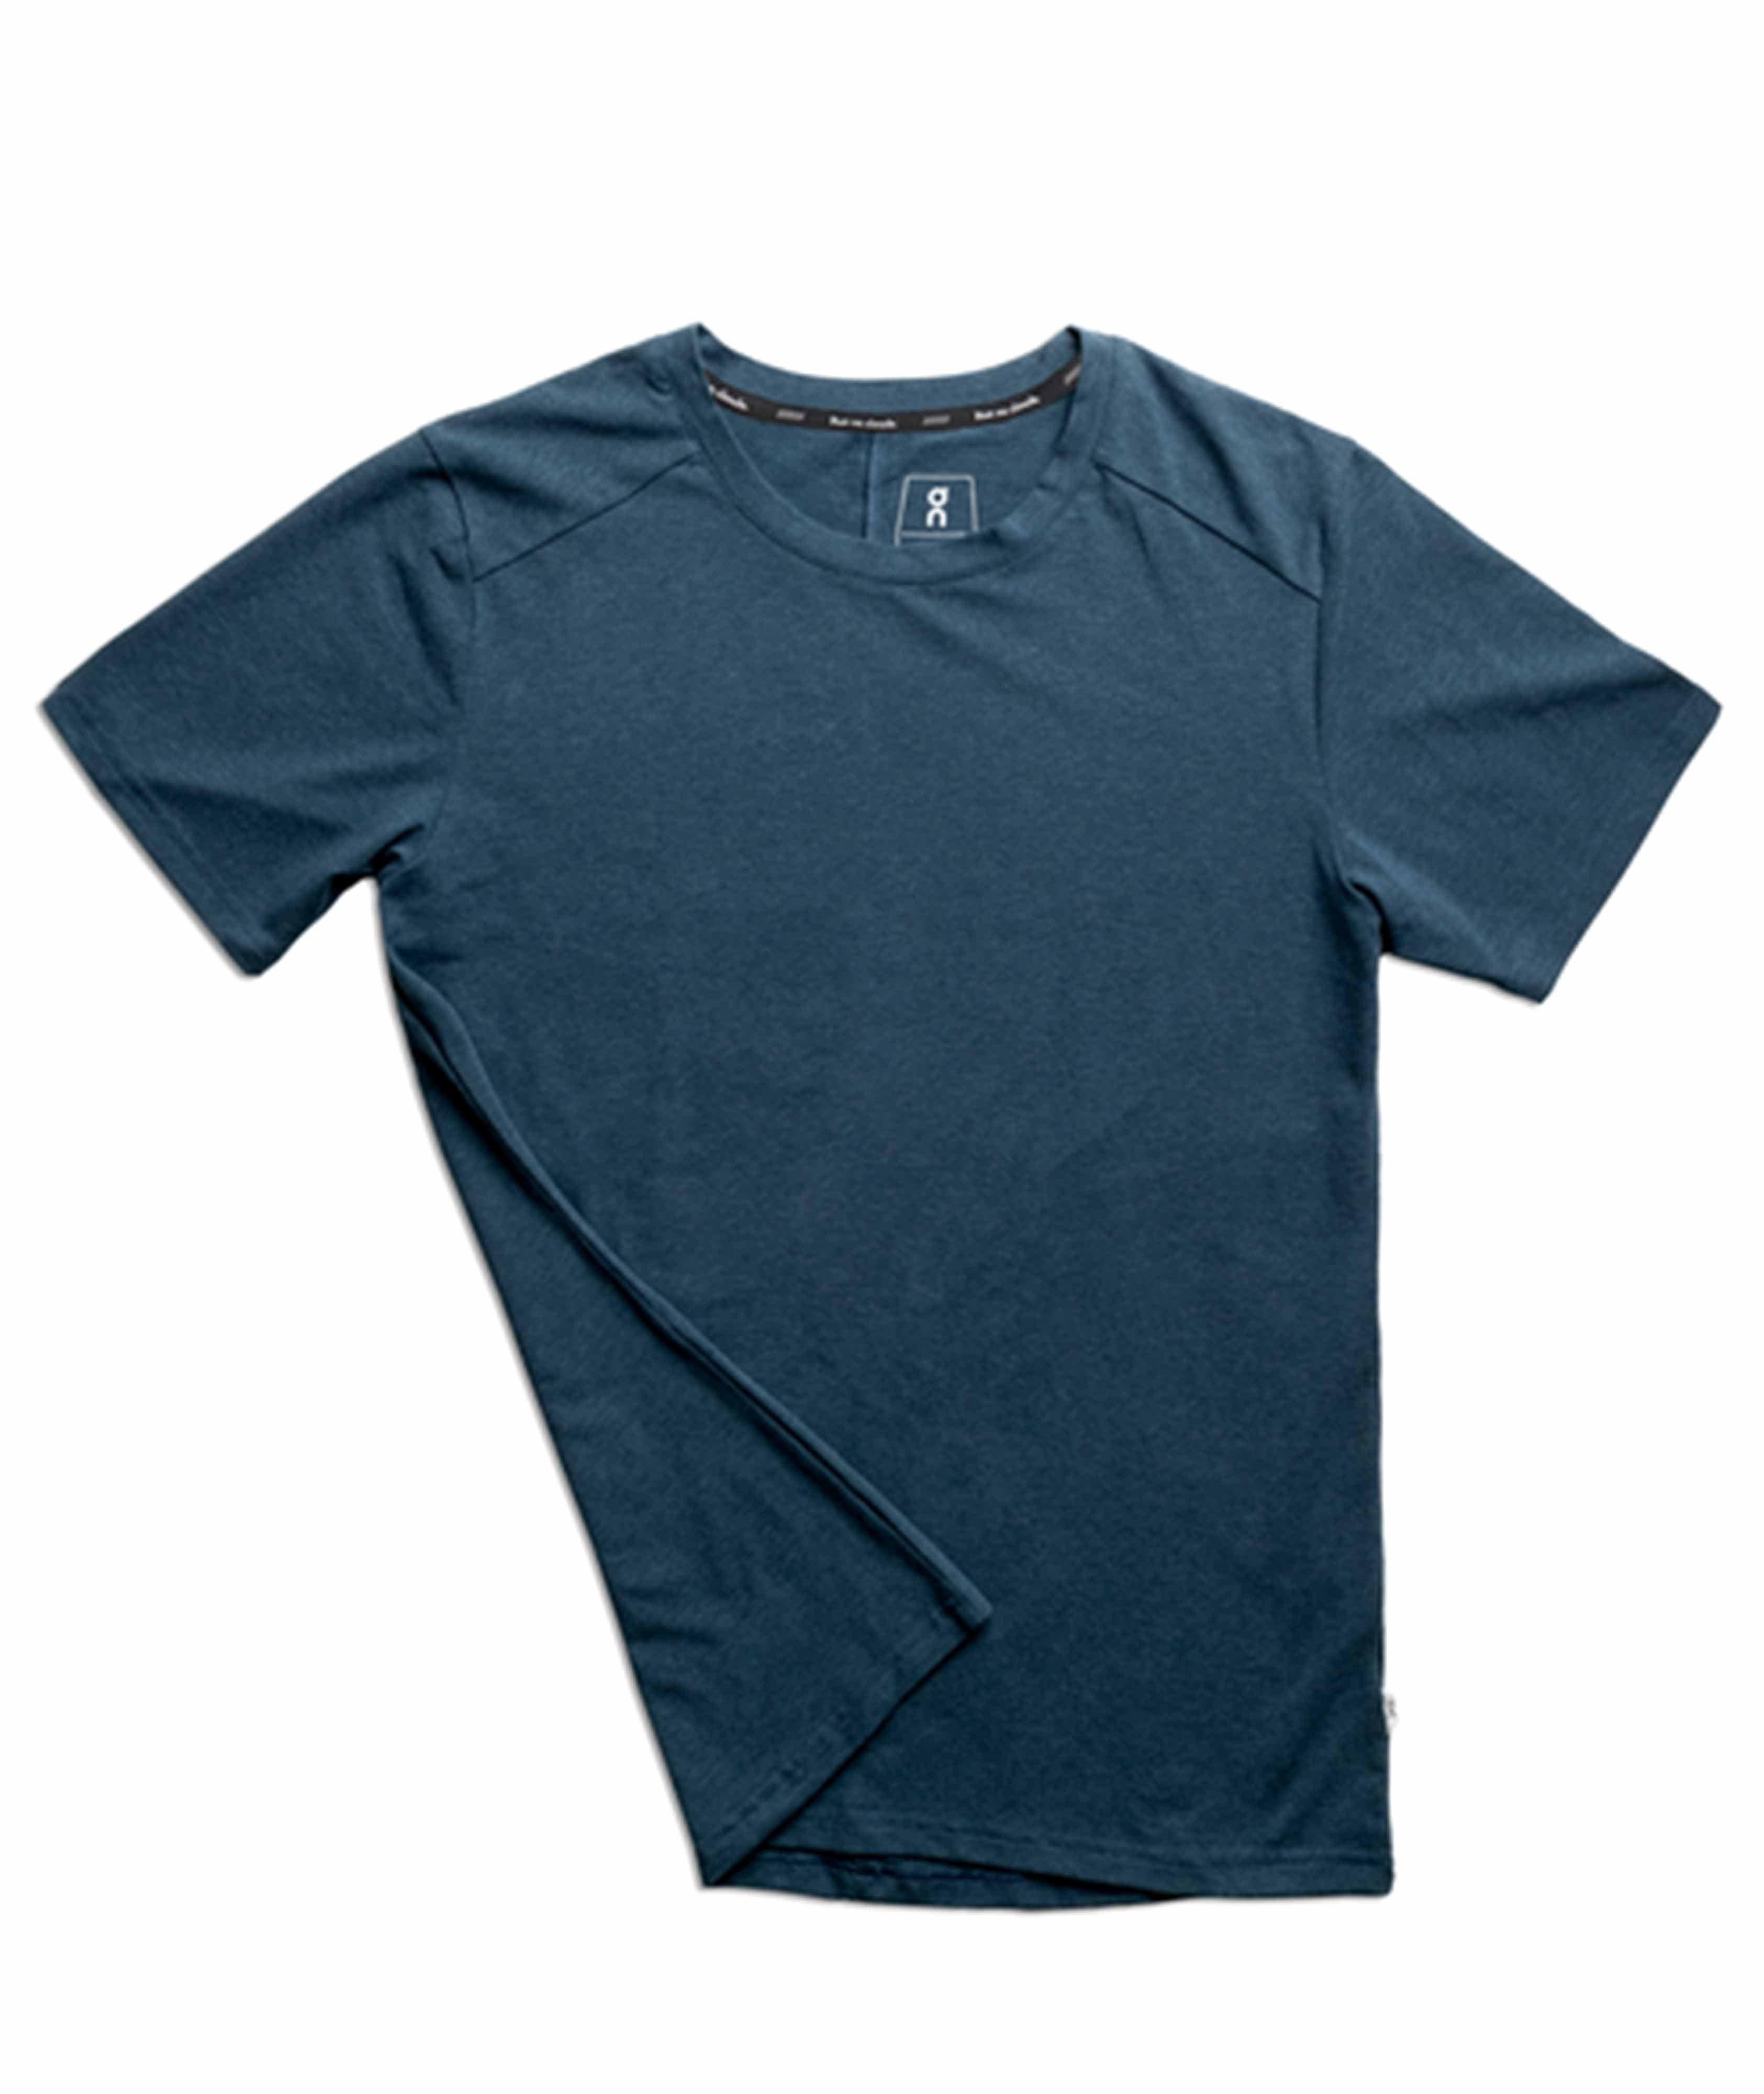 On-T Stretch-Cotton Performance T-Shirt image 0